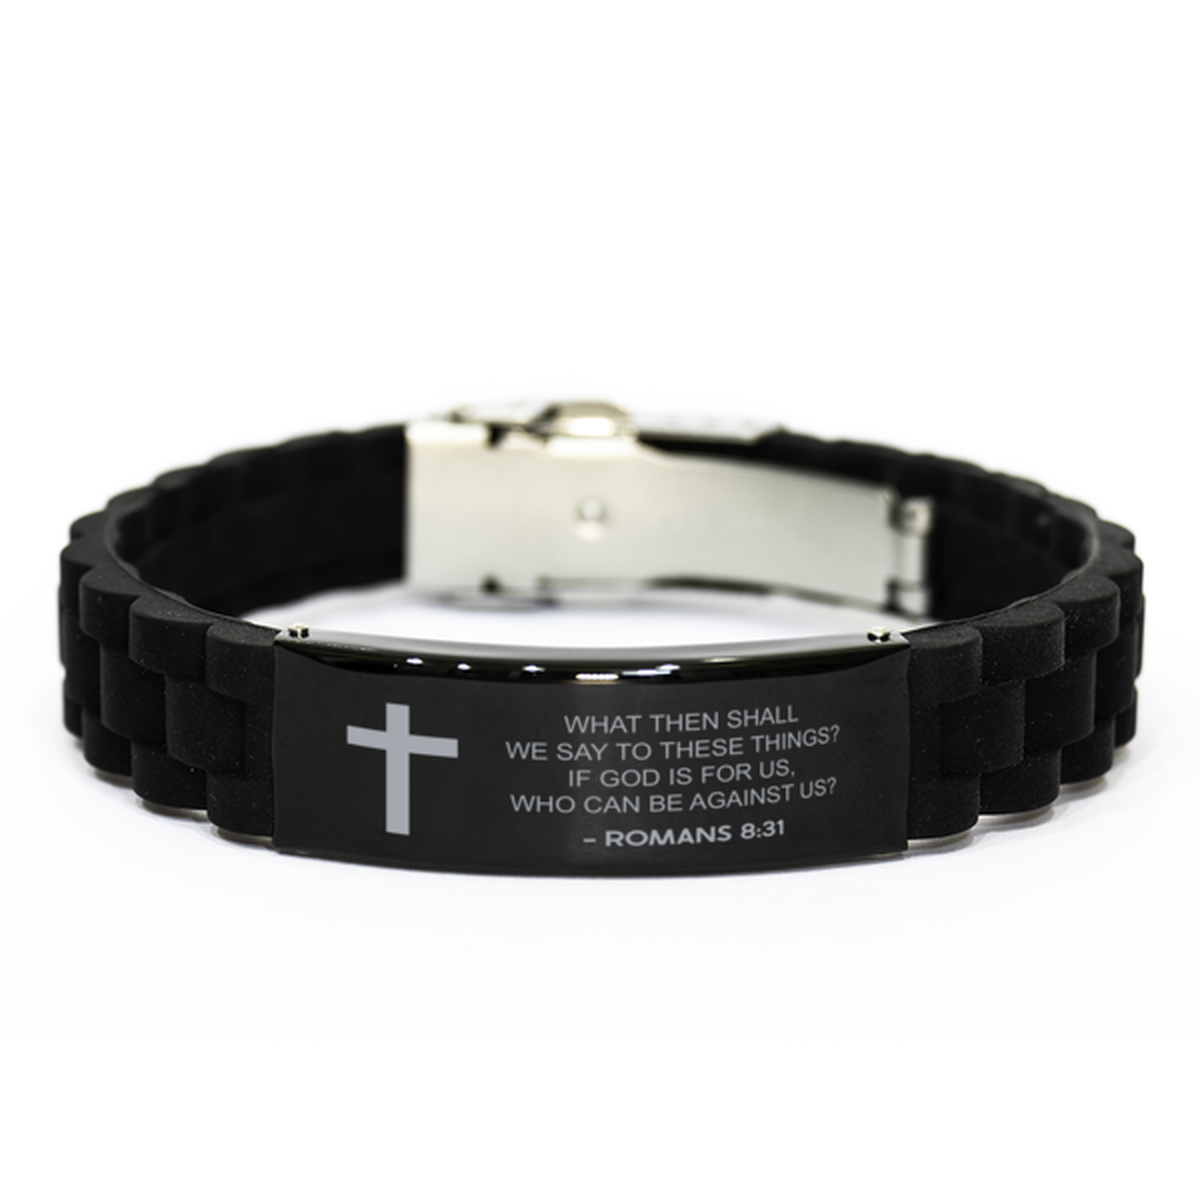 Bible Verse Black Bracelet,, Romans 8:31 What Then Shall We Say To These Things? If God Is, Inspirational Christian Gifts For Men Women